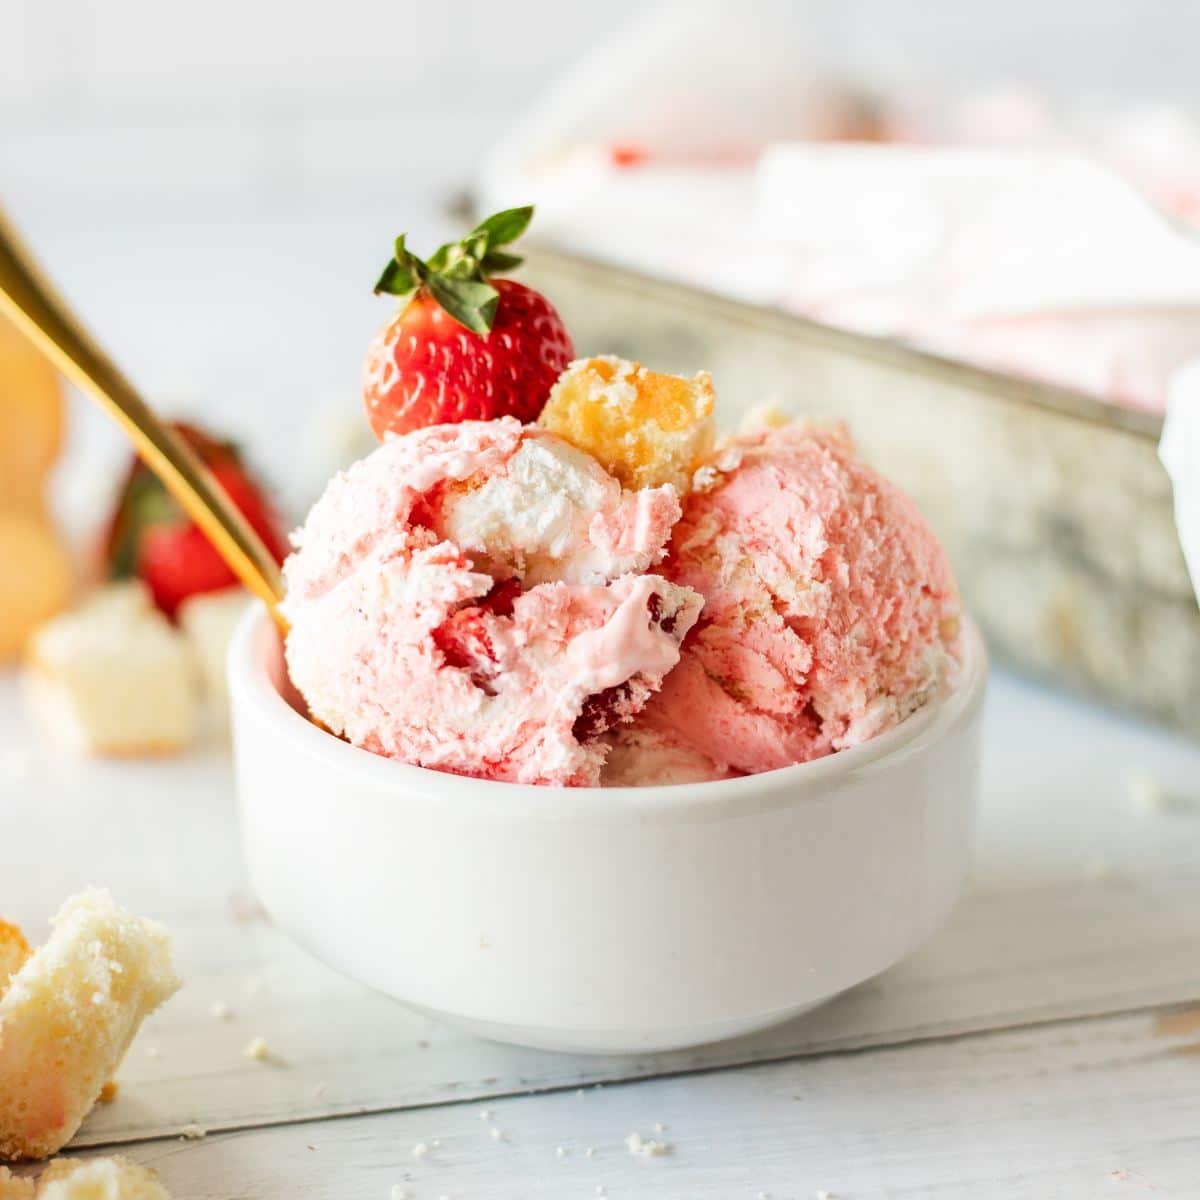 Bowl with three scoops of strawberry shortcake ice cream, with a spoon and a fresh strawberry on top.